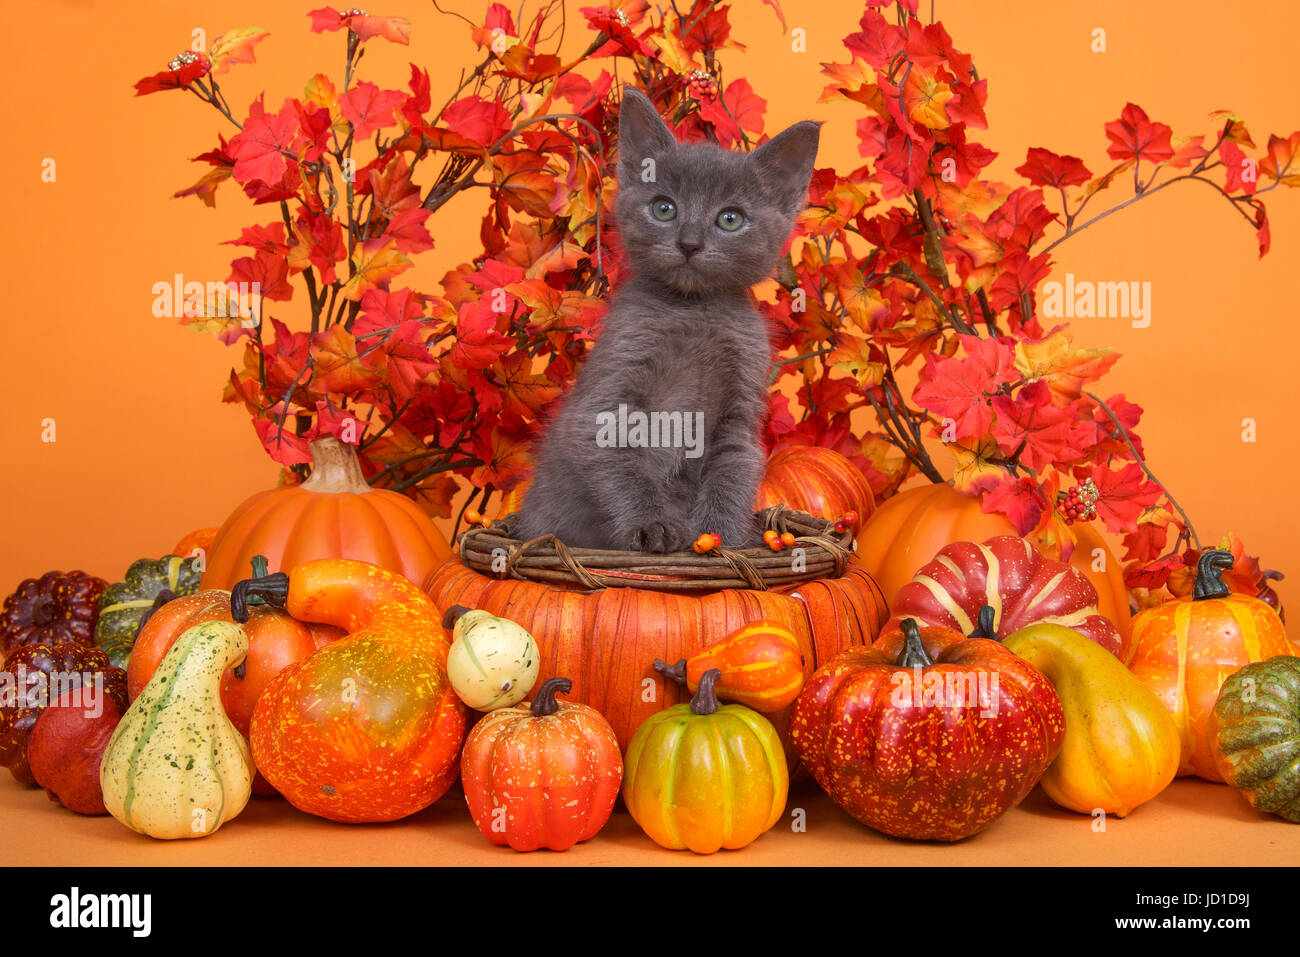 Small gray kitten standing in an orange pumpkin shaped basket surrounded by gourds pumpkins and squash with fall leaves and orange background. Fun fal Stock Photo